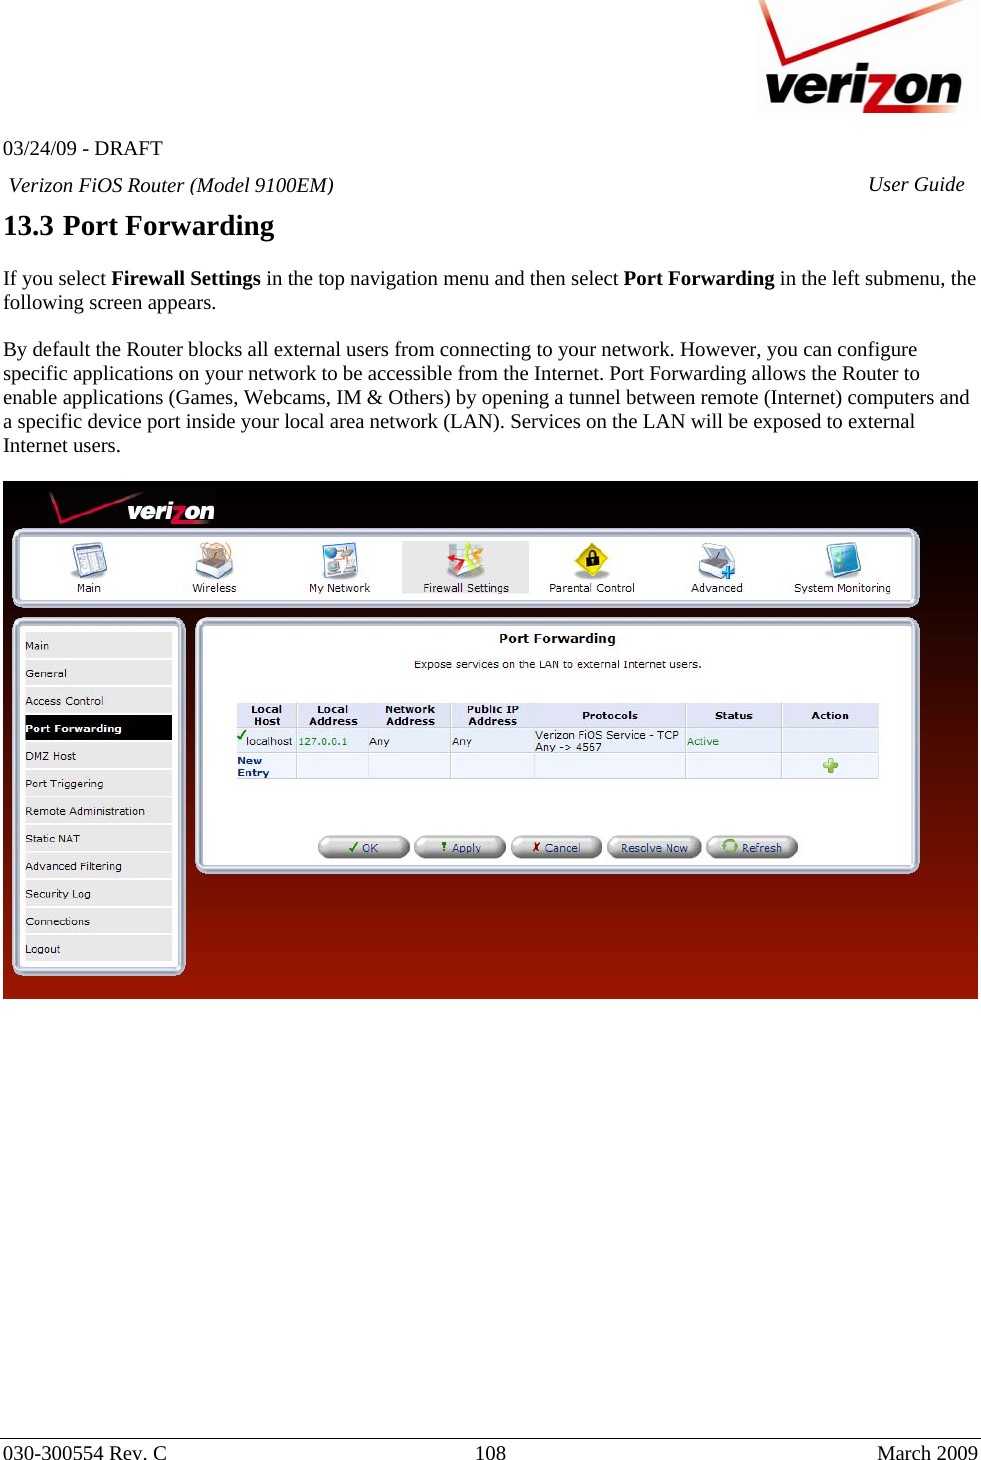   03/24/09 - DRAFT   030-300554 Rev. C  108      March 2009  Verizon FiOS Router (Model 9100EM) User Guide13.3 Port Forwarding  If you select Firewall Settings in the top navigation menu and then select Port Forwarding in the left submenu, the following screen appears.   By default the Router blocks all external users from connecting to your network. However, you can configure specific applications on your network to be accessible from the Internet. Port Forwarding allows the Router to enable applications (Games, Webcams, IM &amp; Others) by opening a tunnel between remote (Internet) computers and a specific device port inside your local area network (LAN). Services on the LAN will be exposed to external Internet users.                     